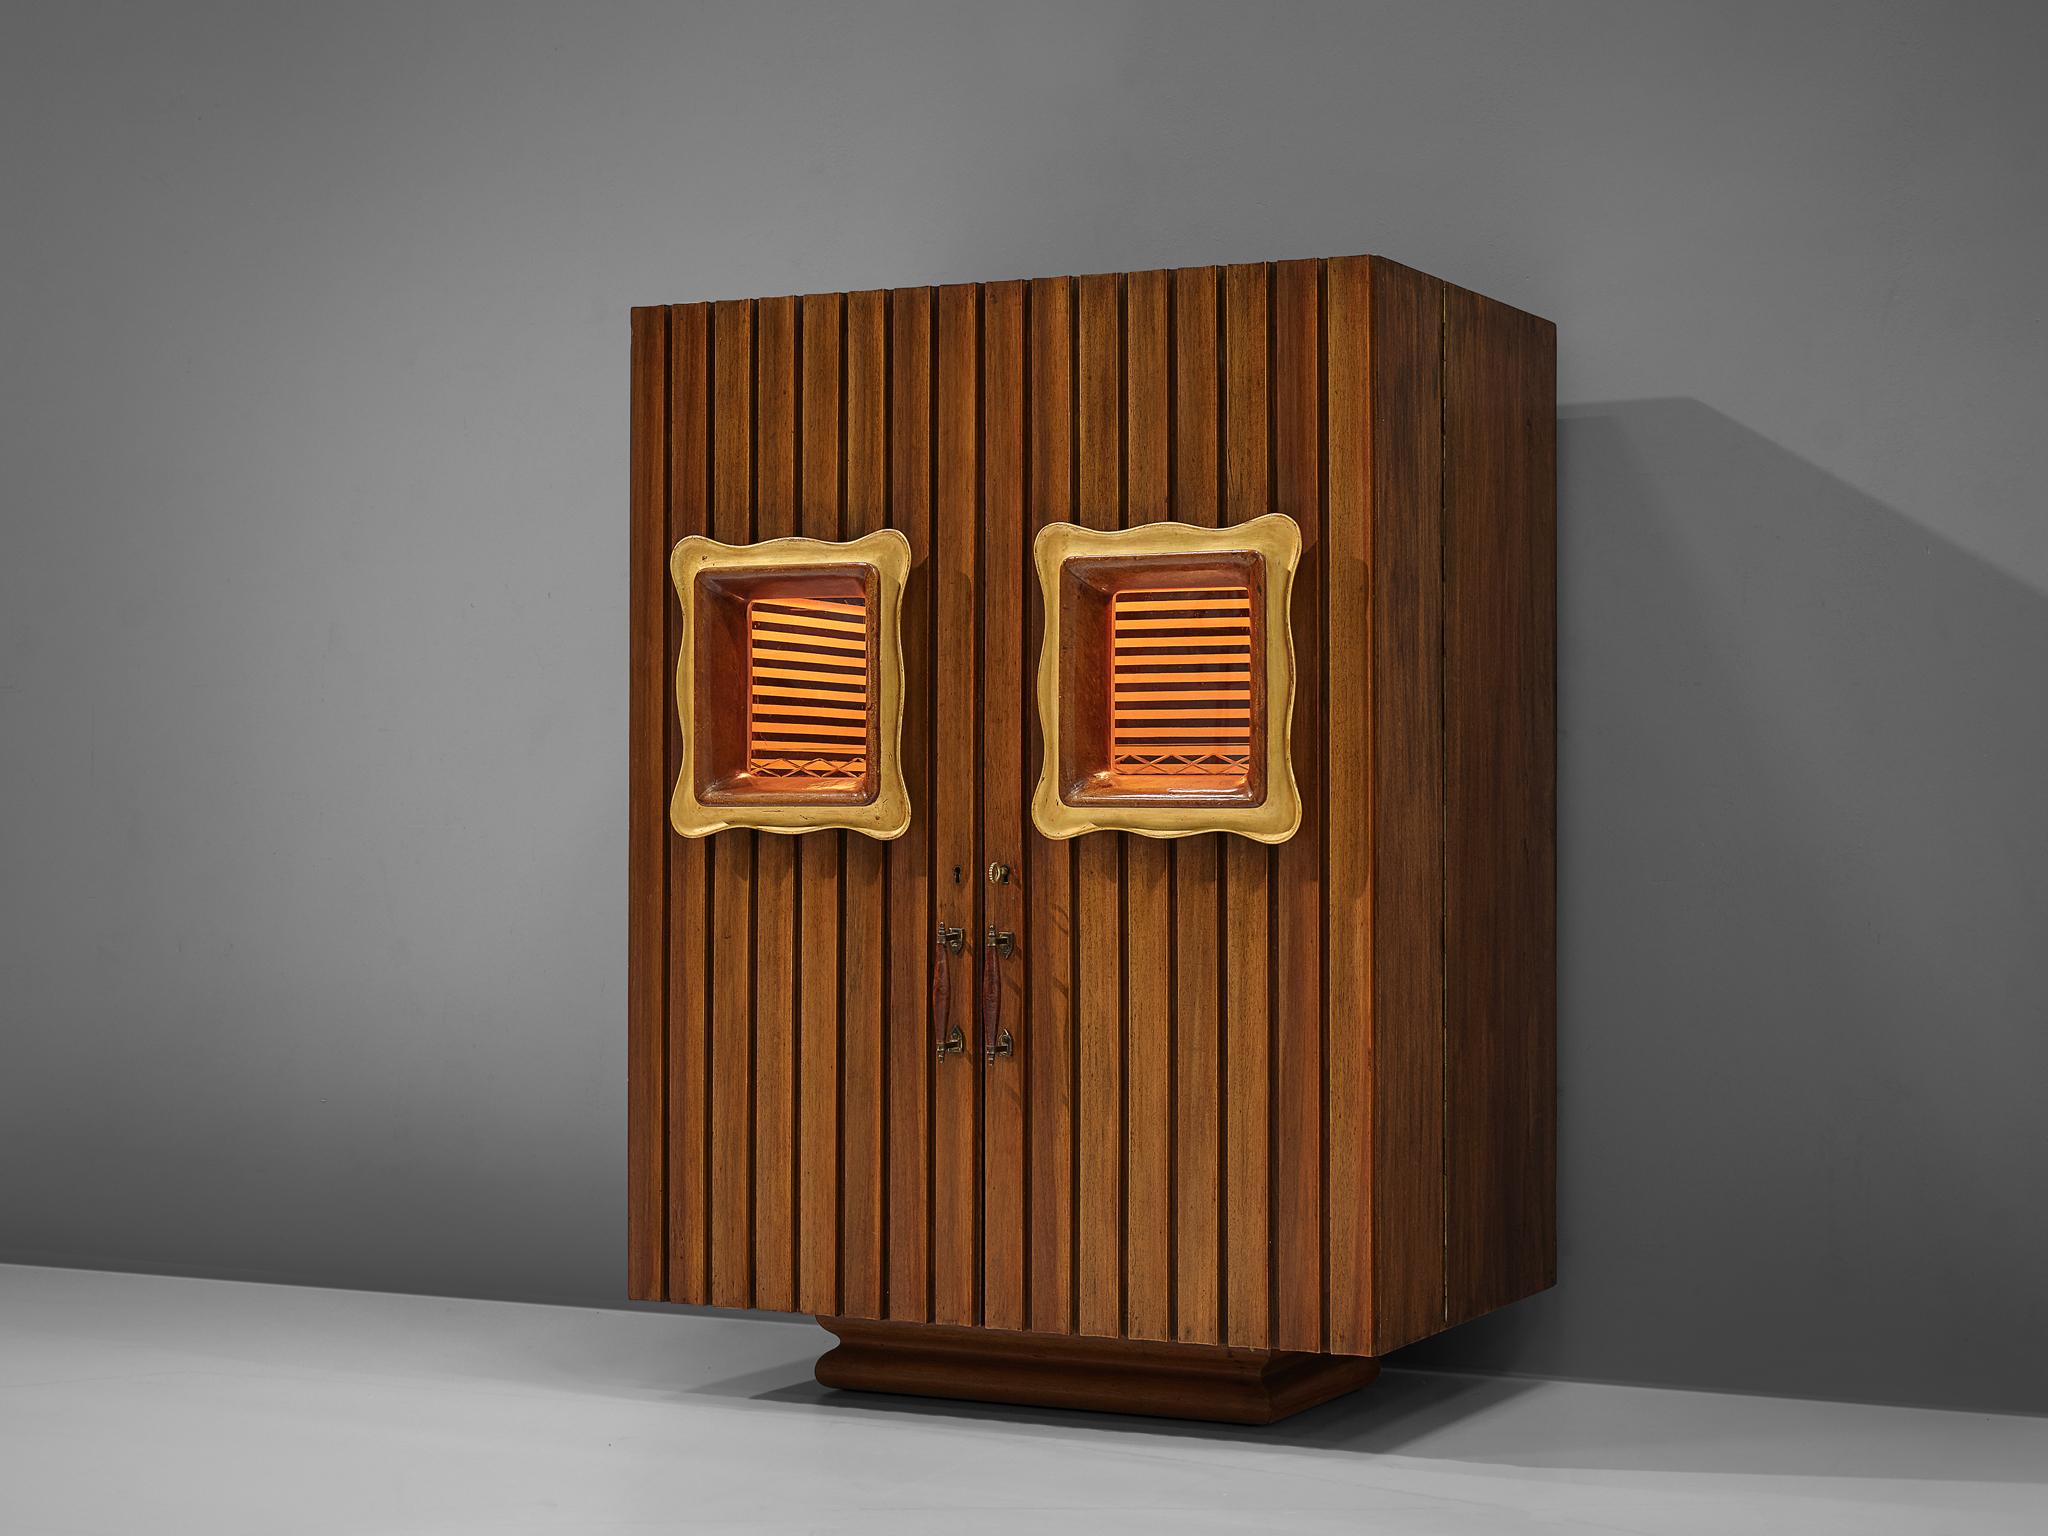 Dry bar, walnut, wood, glass, brass, gold lacquered wood, Italy, 1940s

This Art Deco Italian dry bar has been designed, circa 1940s. The doors have a striking design with the vertically placed scalloped slats, creating a striped pattern. This